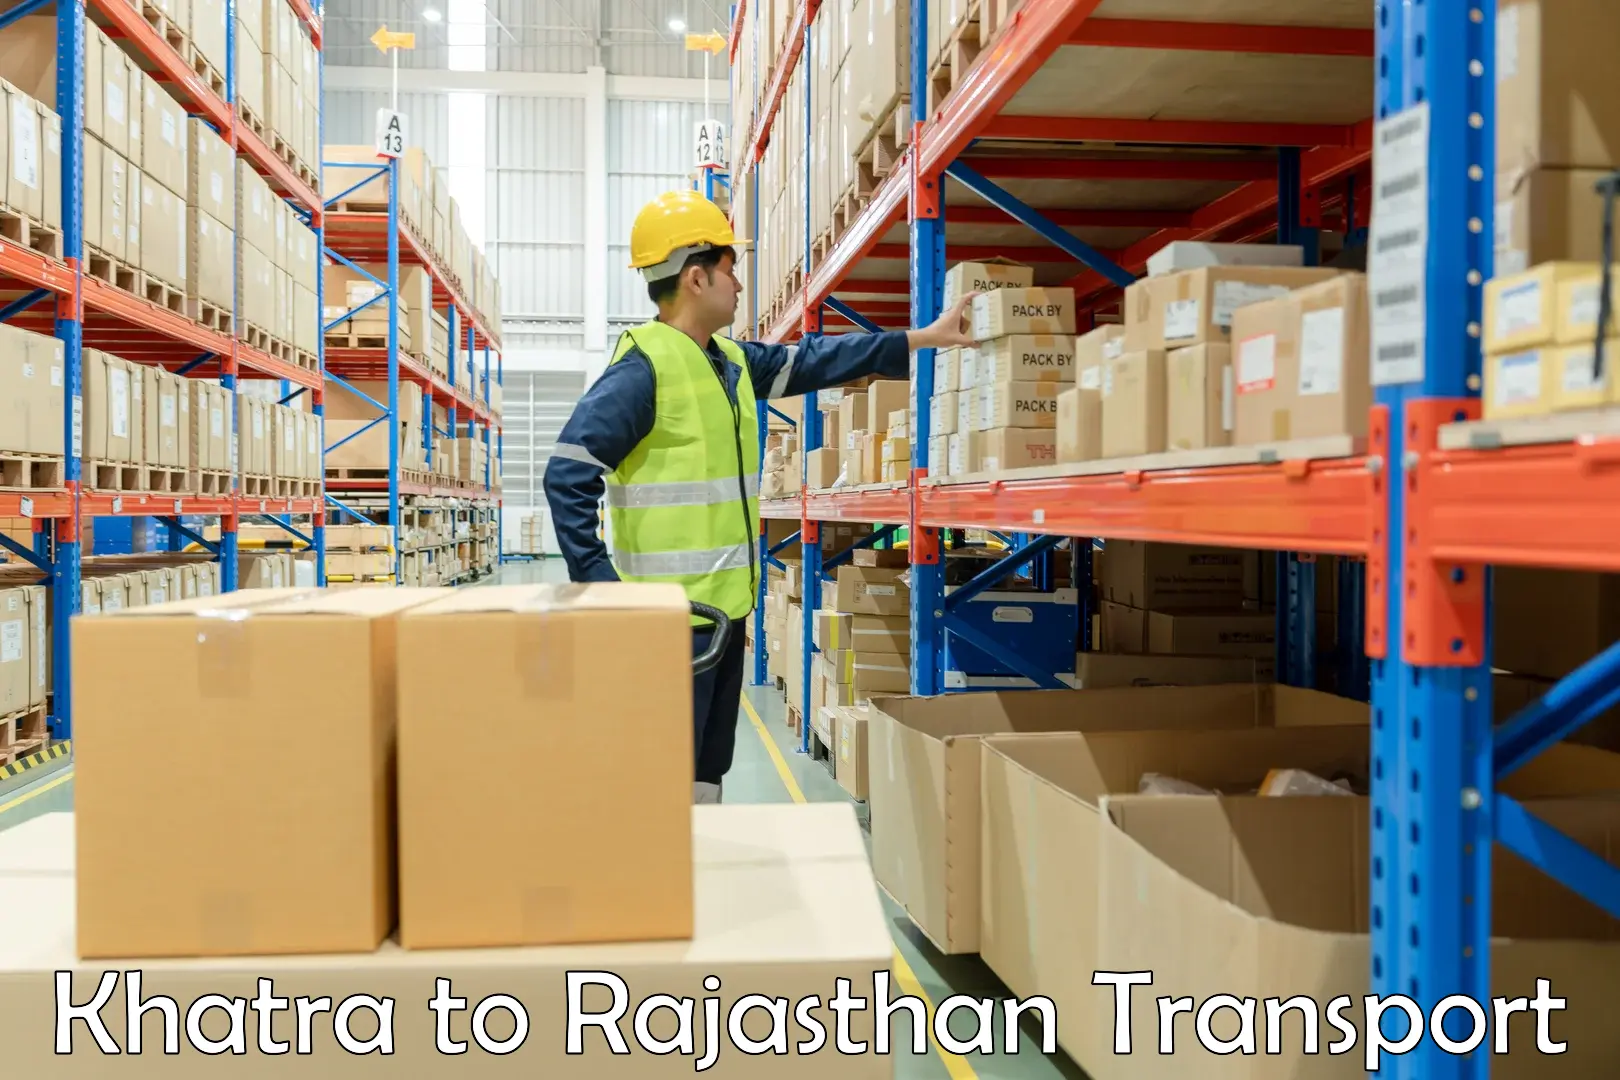 Transport shared services Khatra to Rajasthan